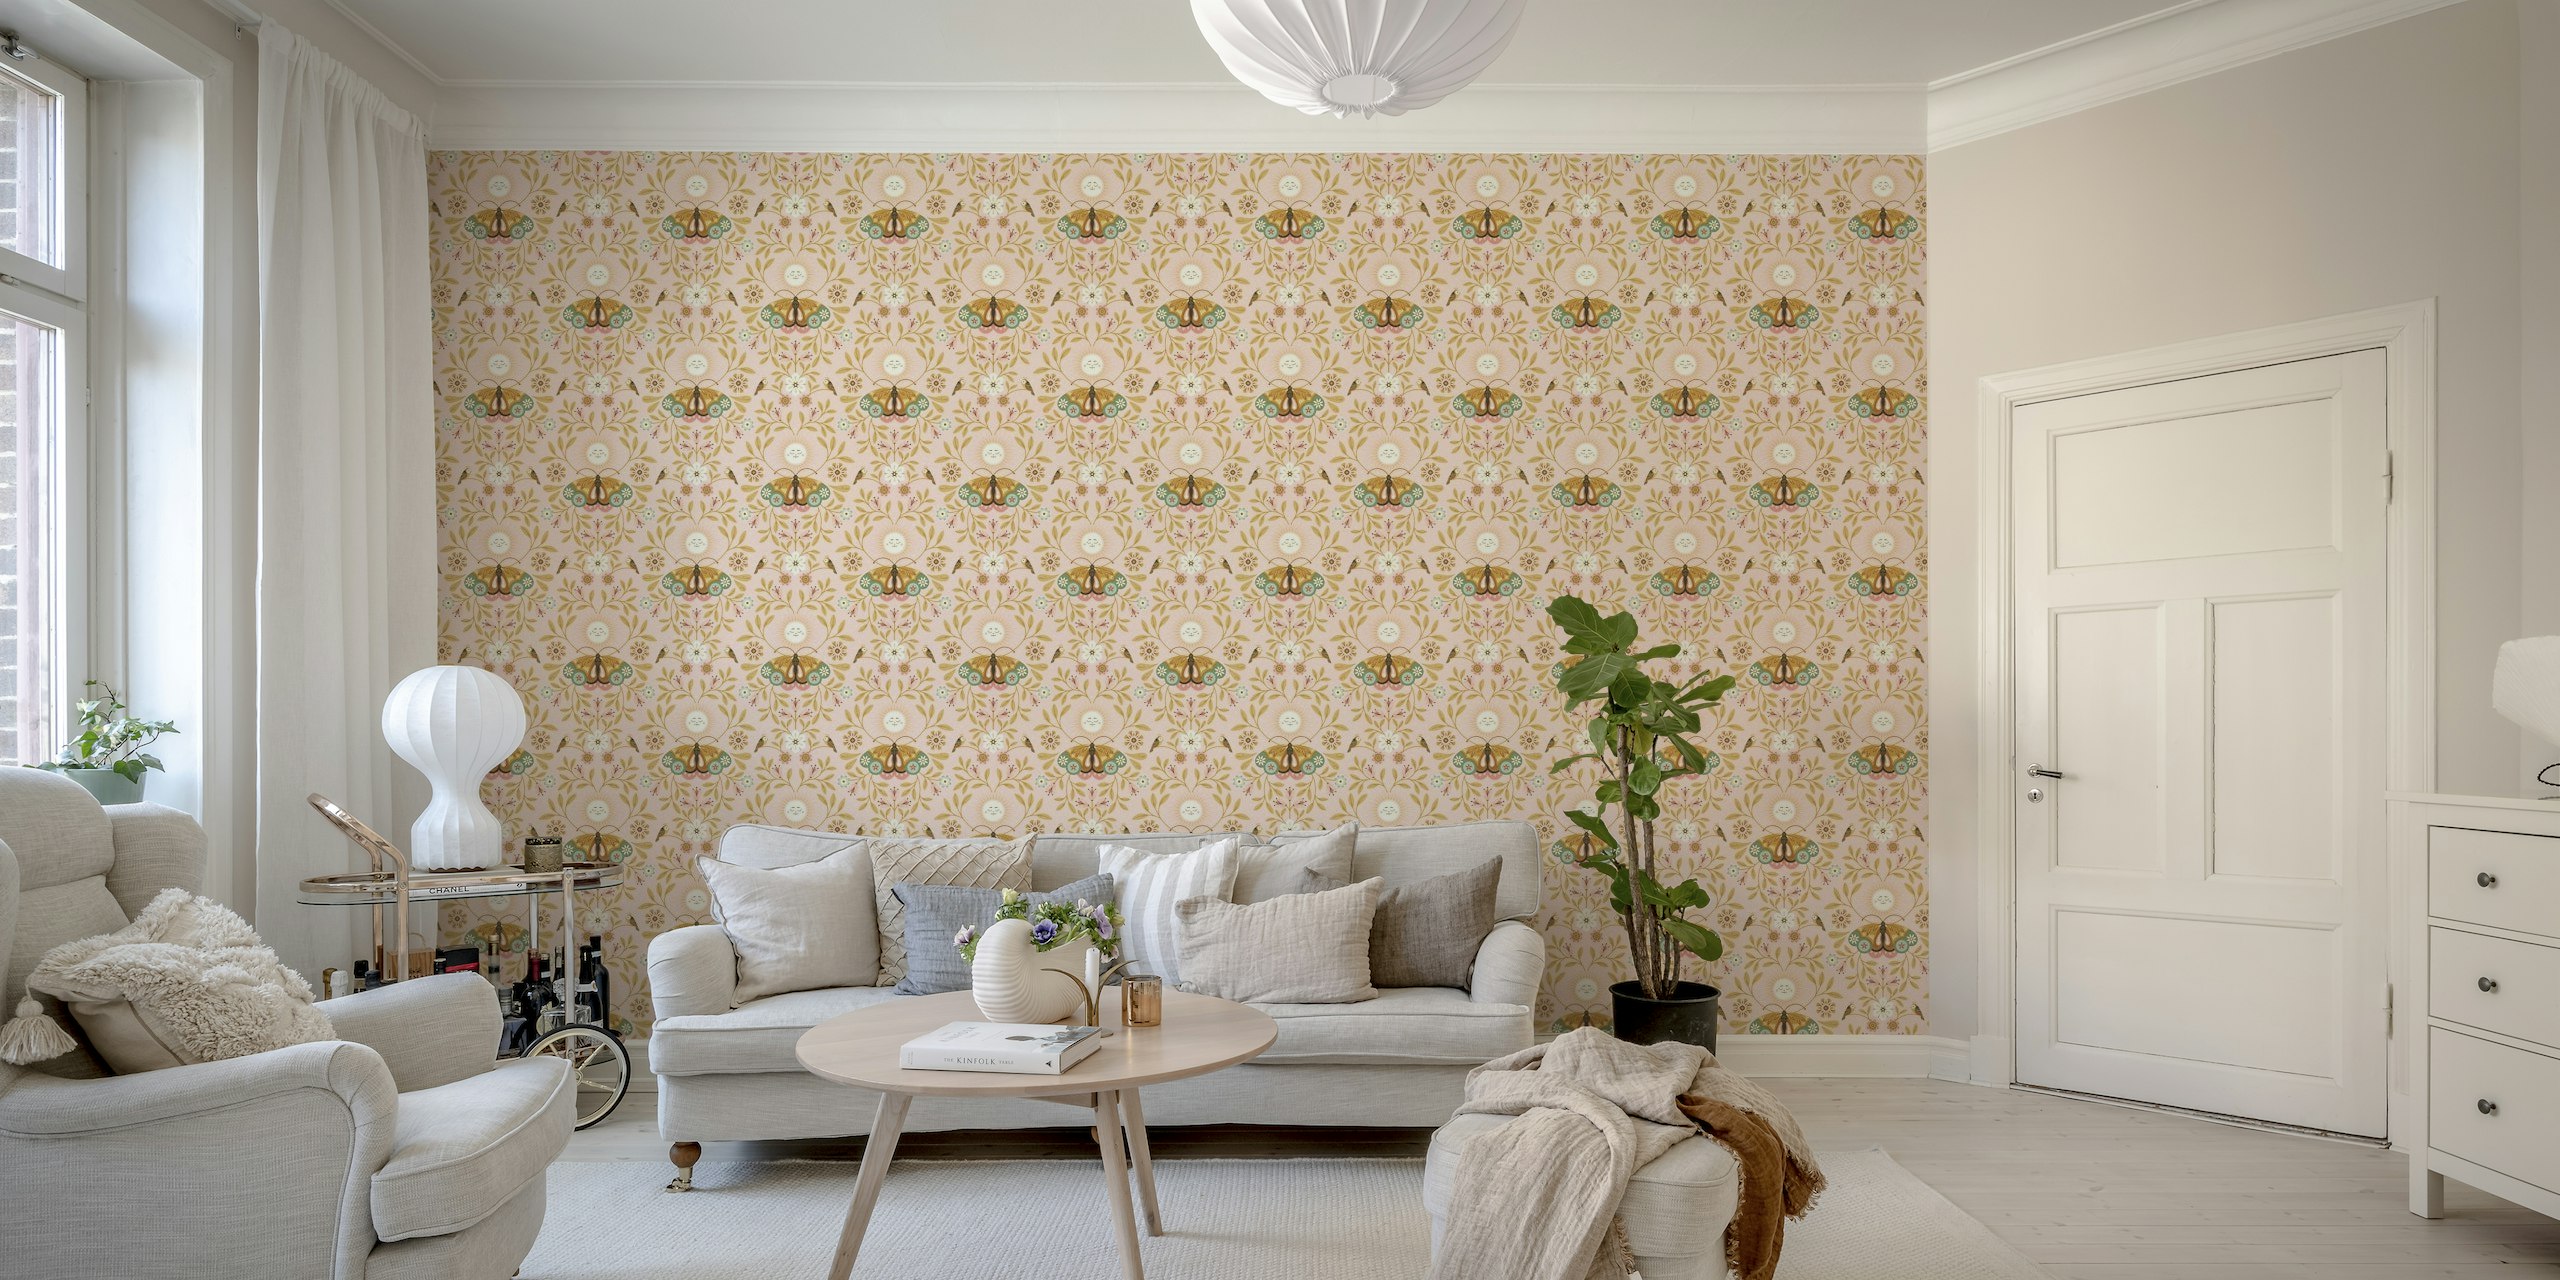 Lunar Moth Meadow wall mural with light pink background, featuring moths and floral patterns